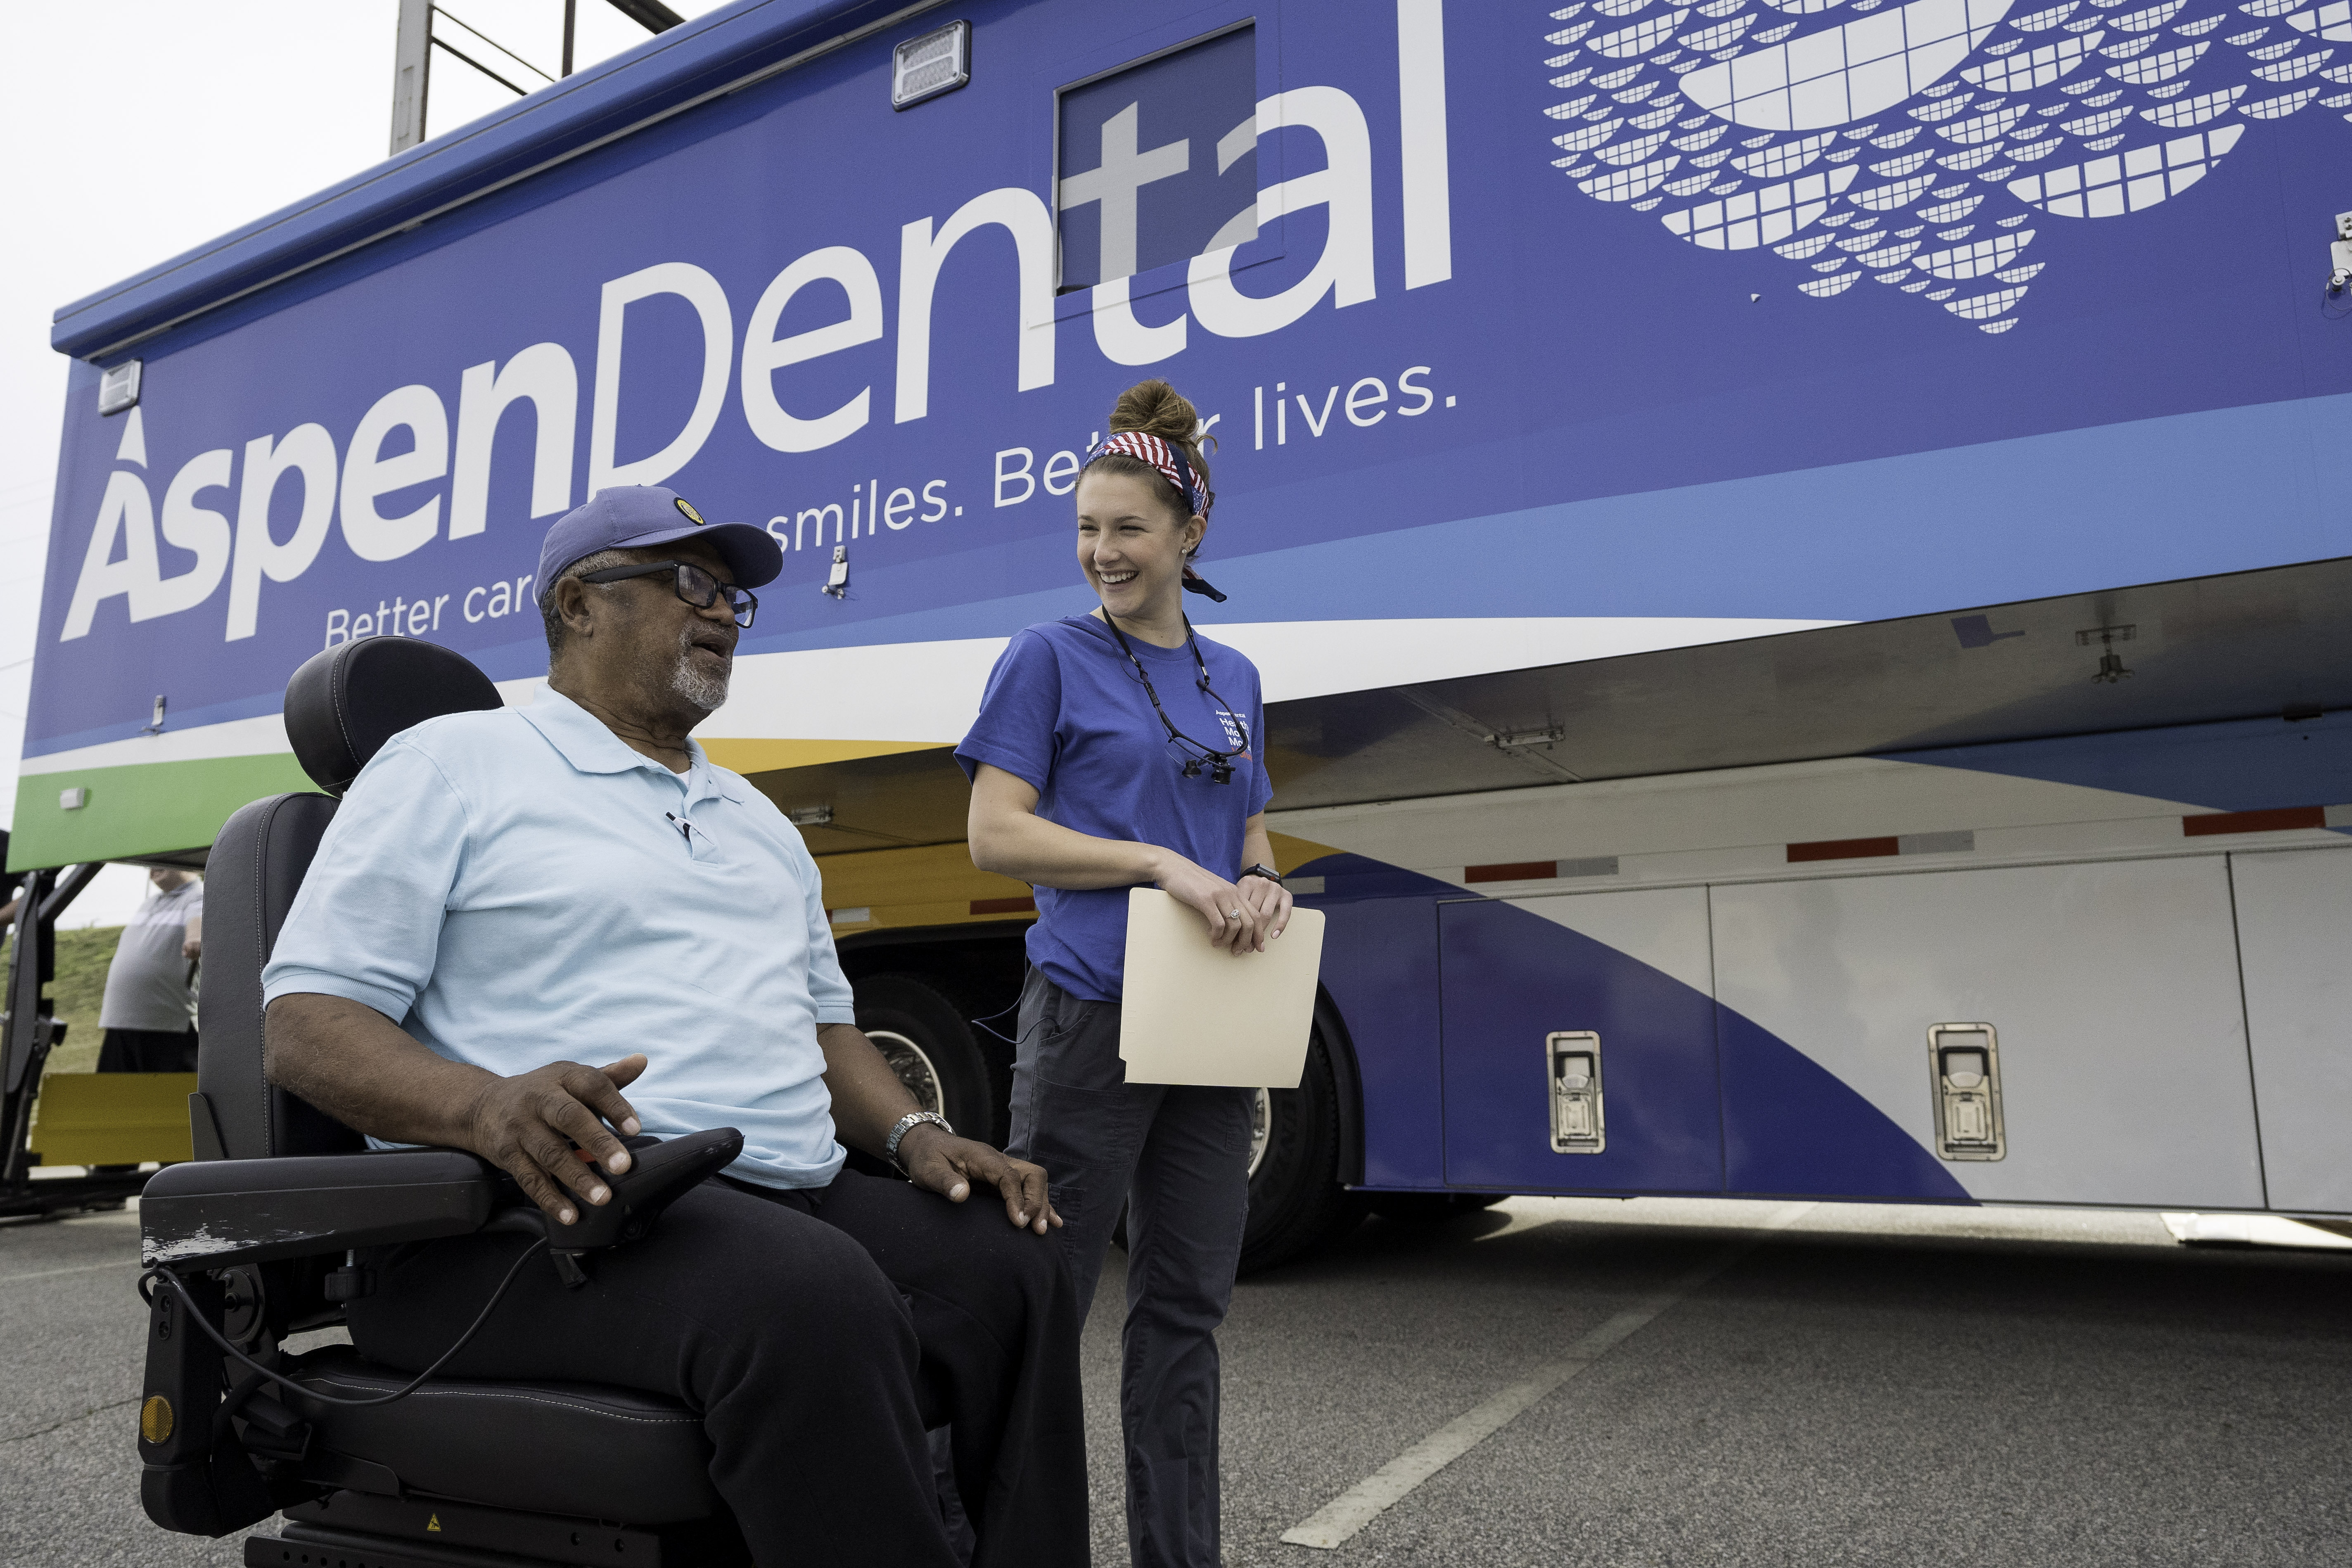 A man in a wheelchair next to a young female dental volunteer in front of the aspen dental mouth mobile bus